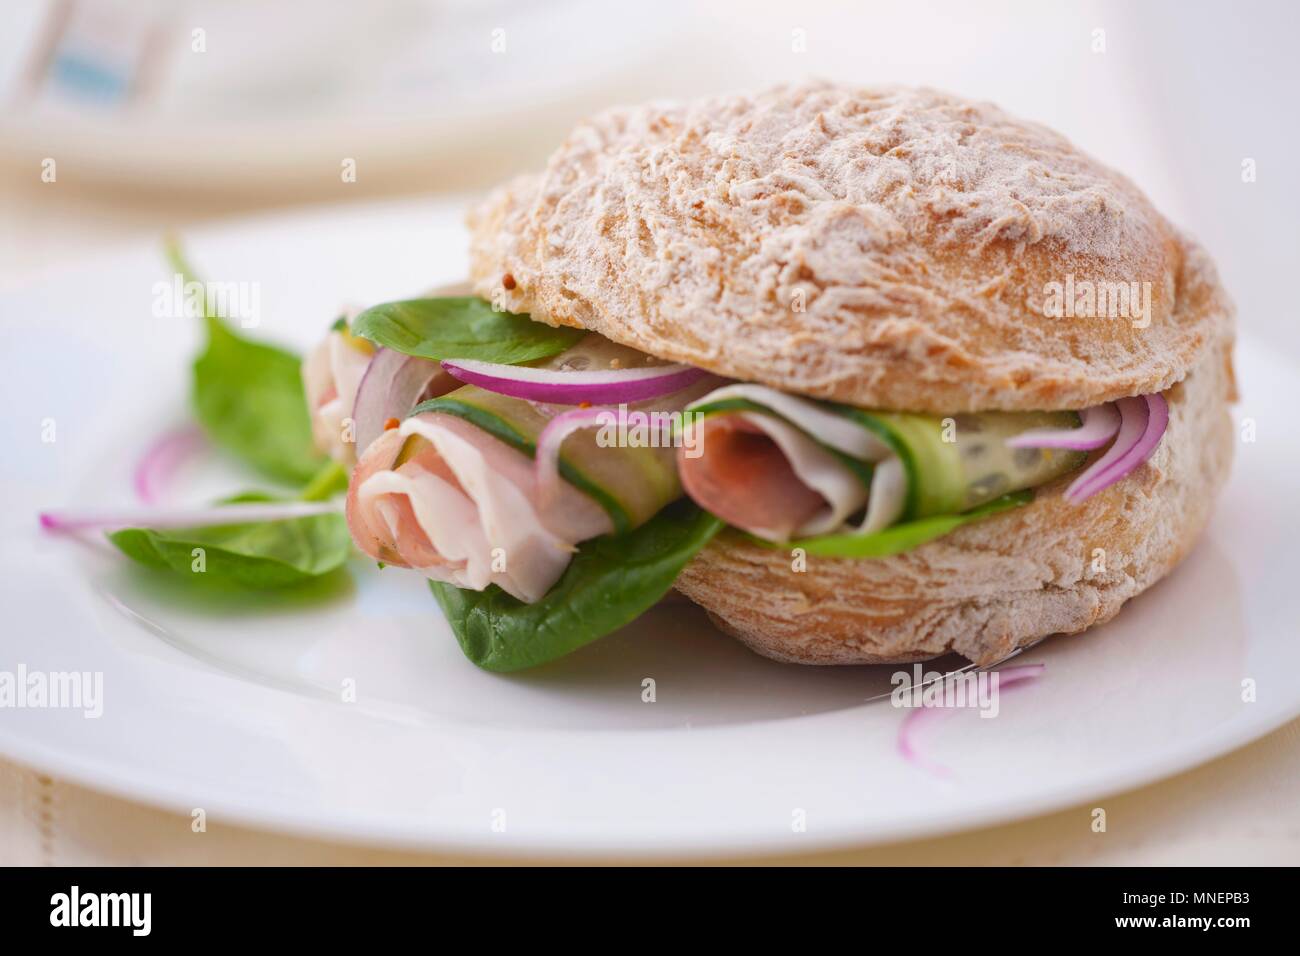 A sandwich filled with spinach, prosciutto, cucumber and onions Stock Photo